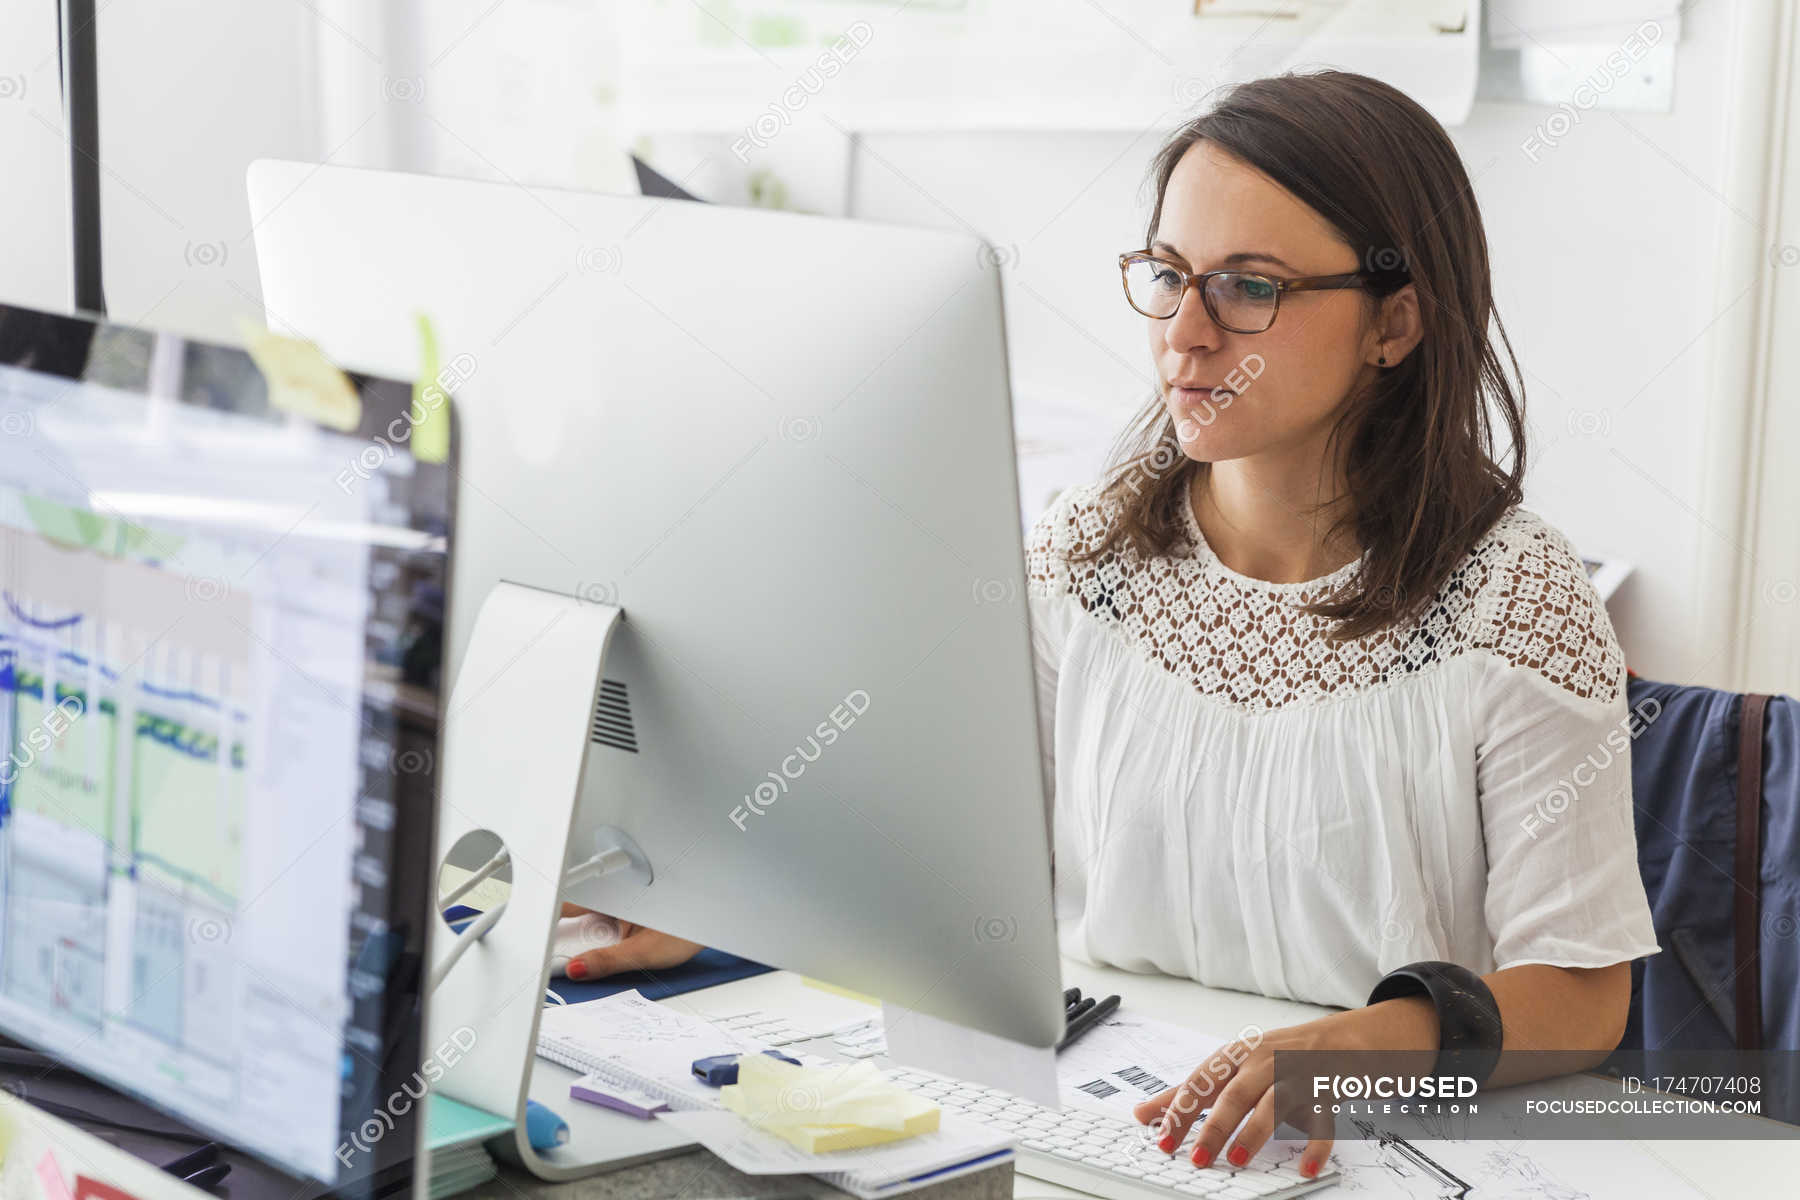 Landscape architect working with computer at desk — person, spectacles -  Stock Photo | #174707408